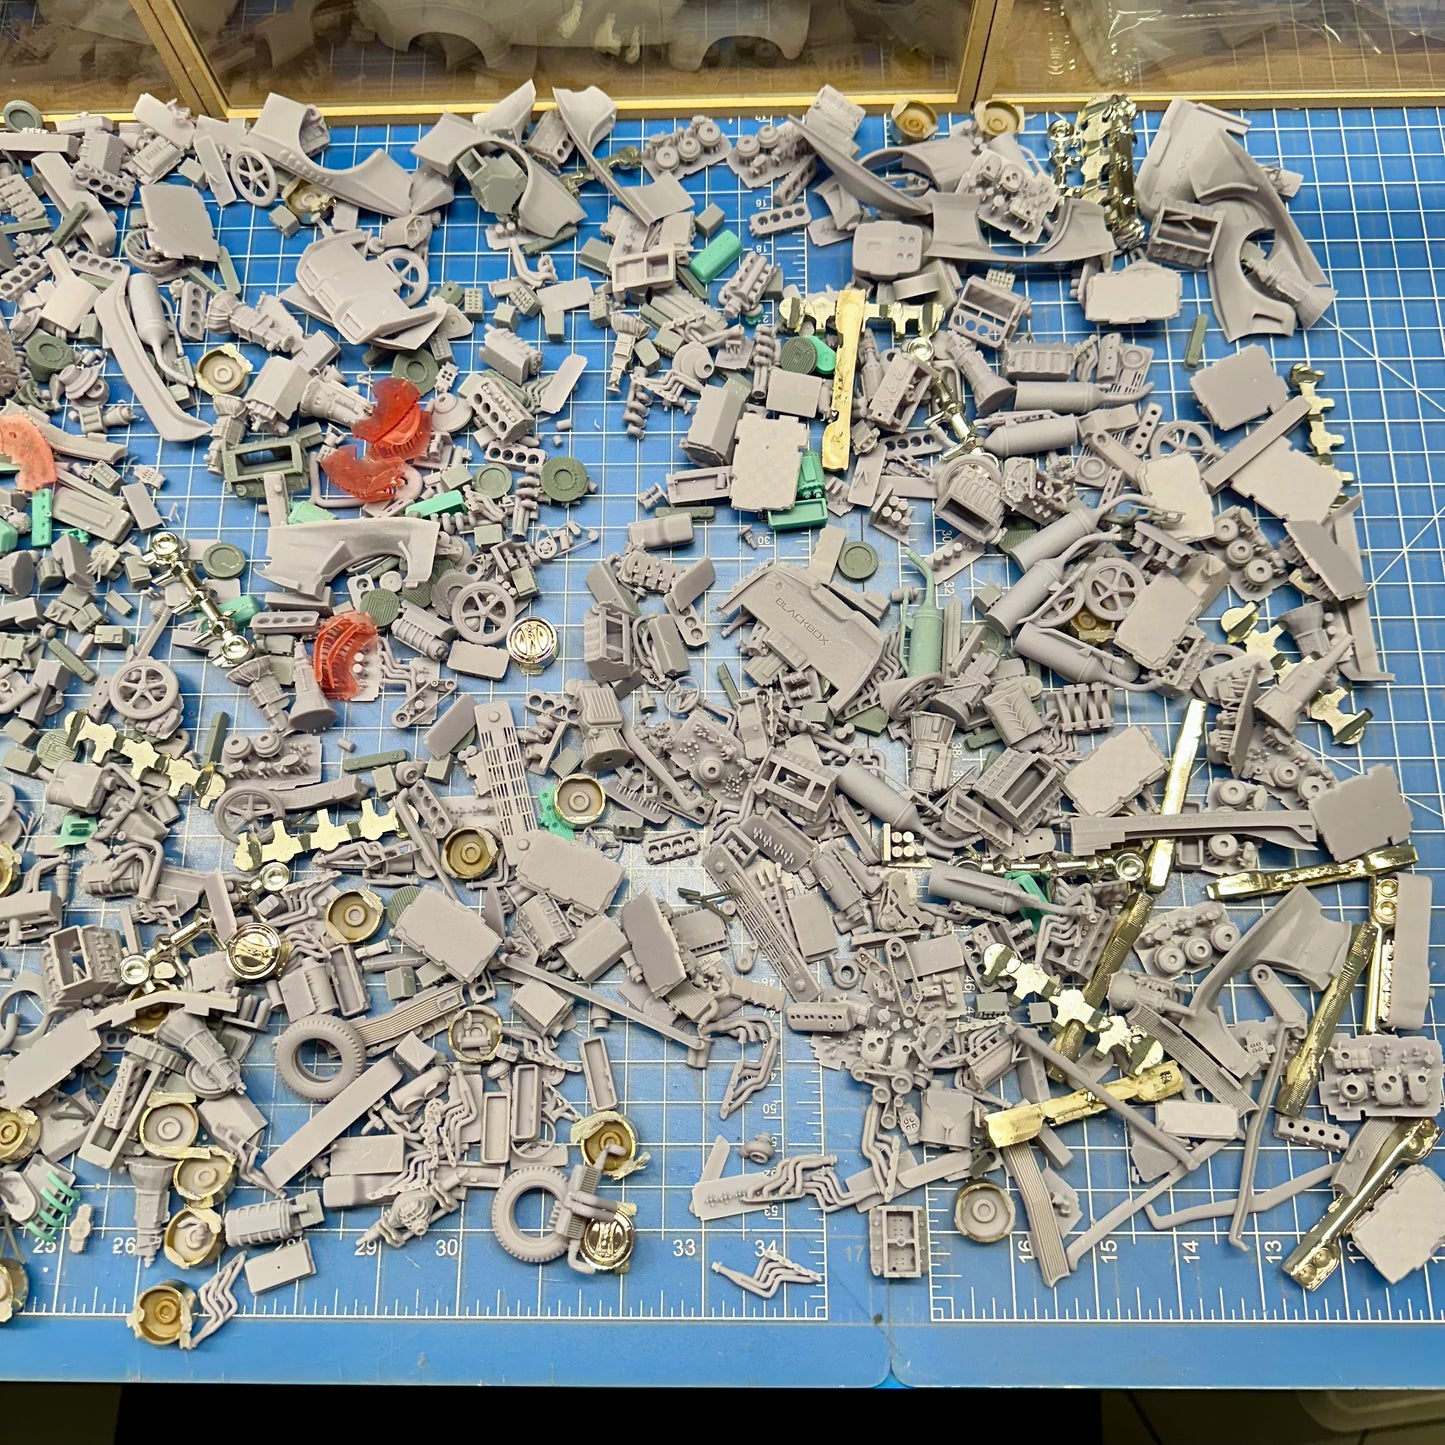 Garage Clutter - Parts for Diorama Display 1/24 1/25